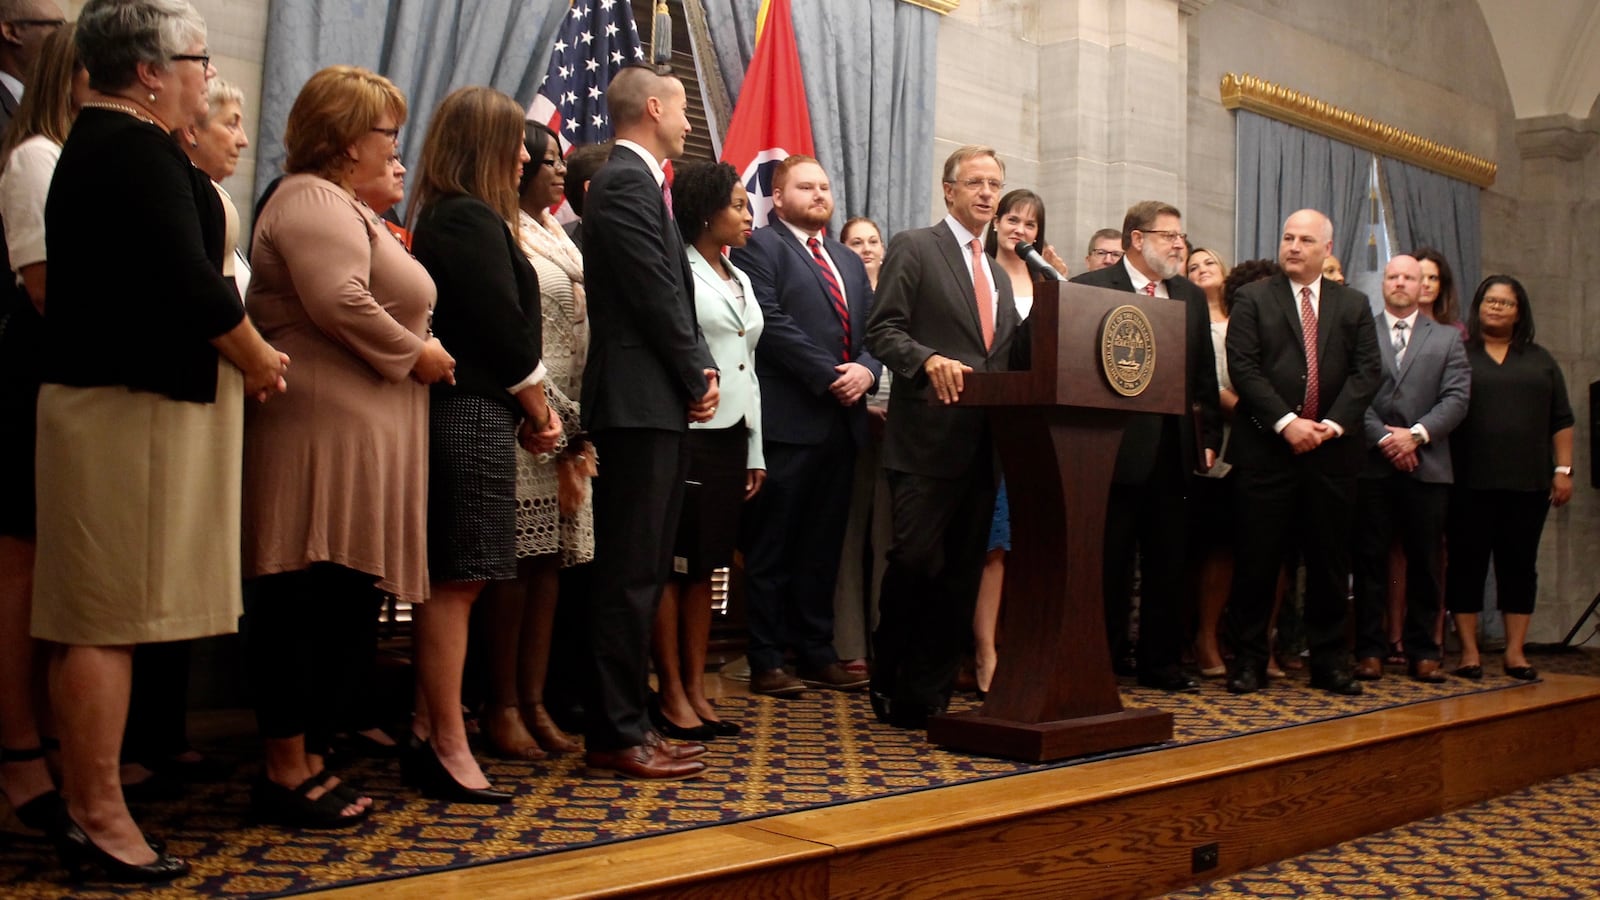 Flanked by 37 educators serving as Tennessee's new "TNReady ambassadors," Gov. Bill Haslam announces the kickoff of a statewide "listening tour" aimed at improving administration of the state's standardized assessment.